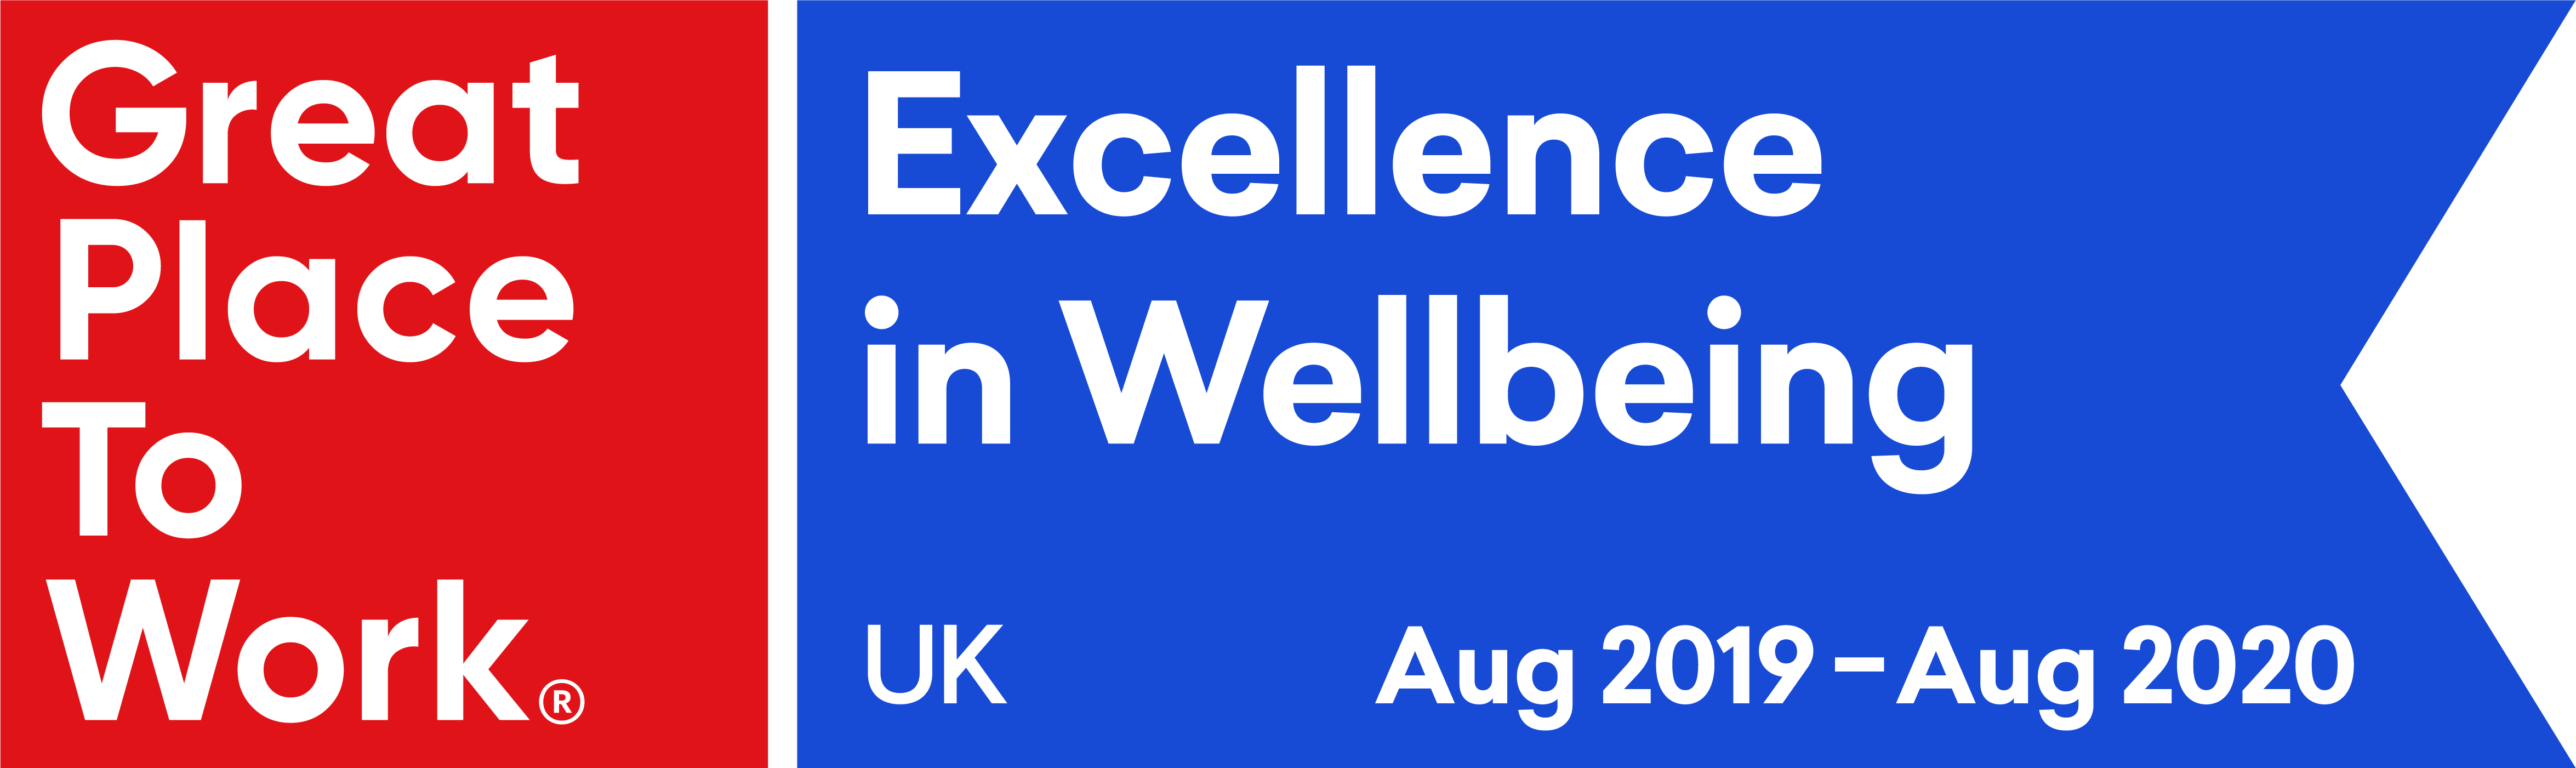 Great Place to Work: Excellence in Wellbeing logo